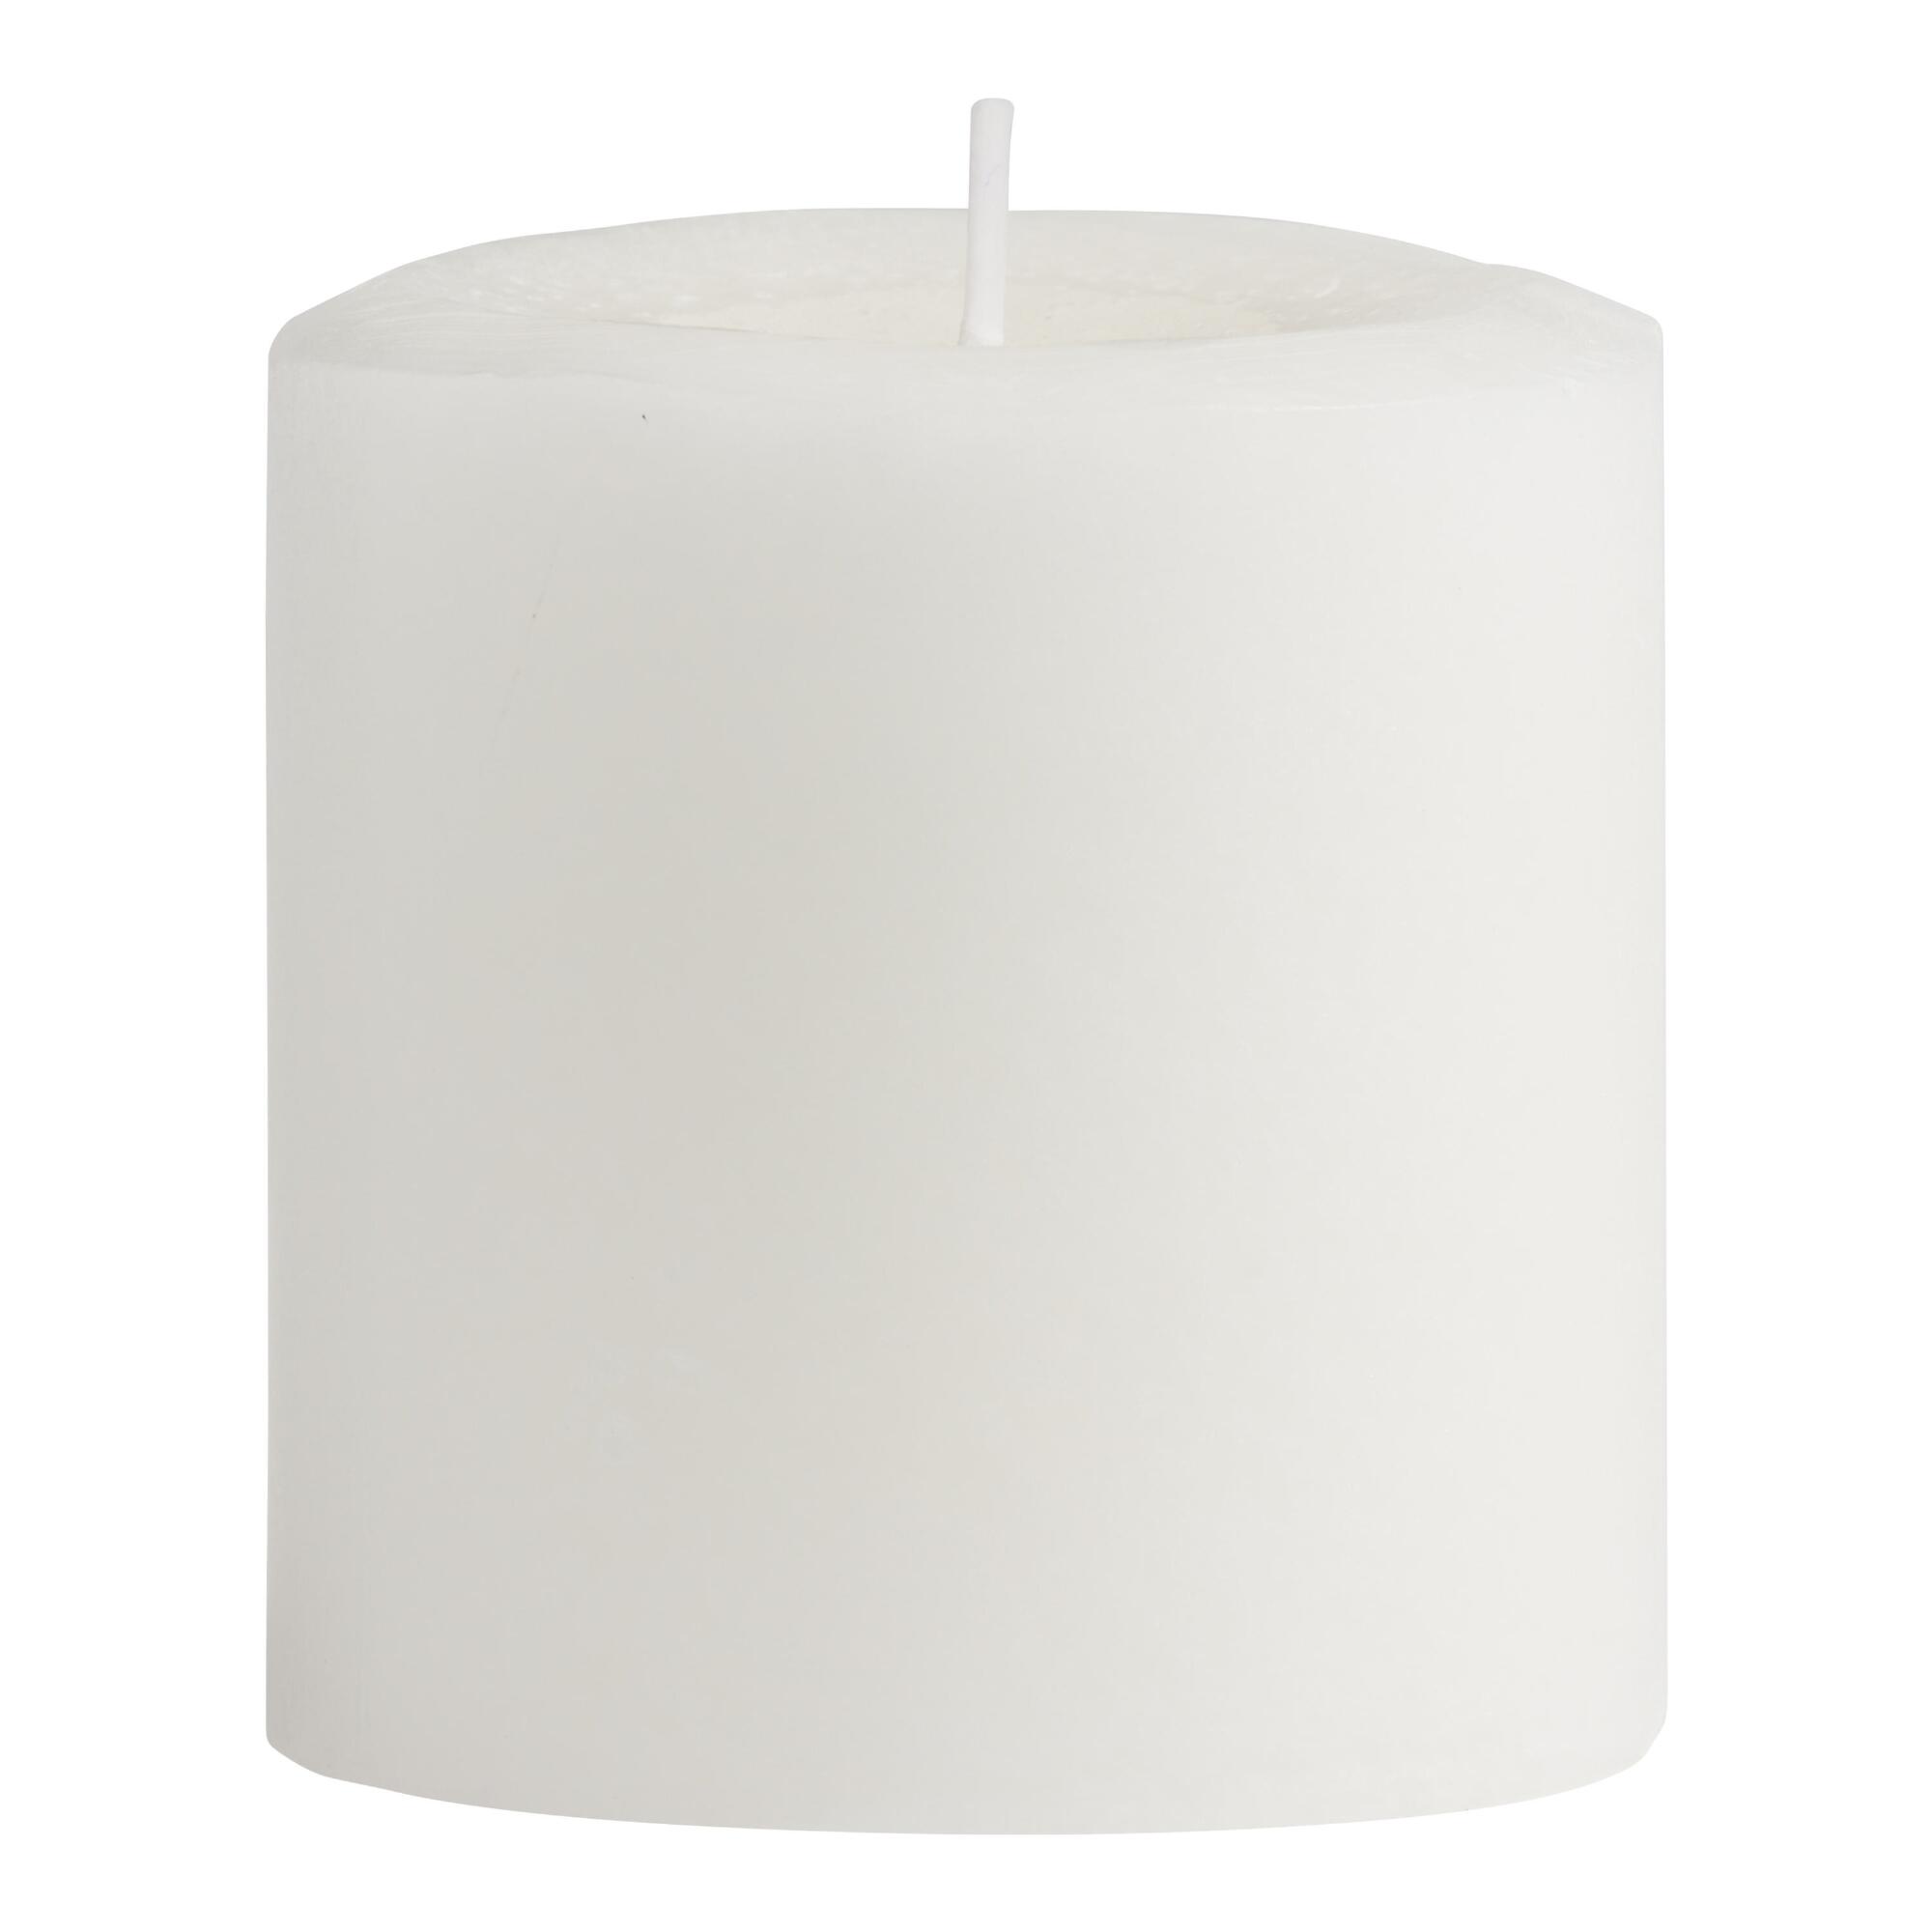 3x3 Moroccan Peony Mottled Pillar Scented Candle: White - Scented Wax by World Market